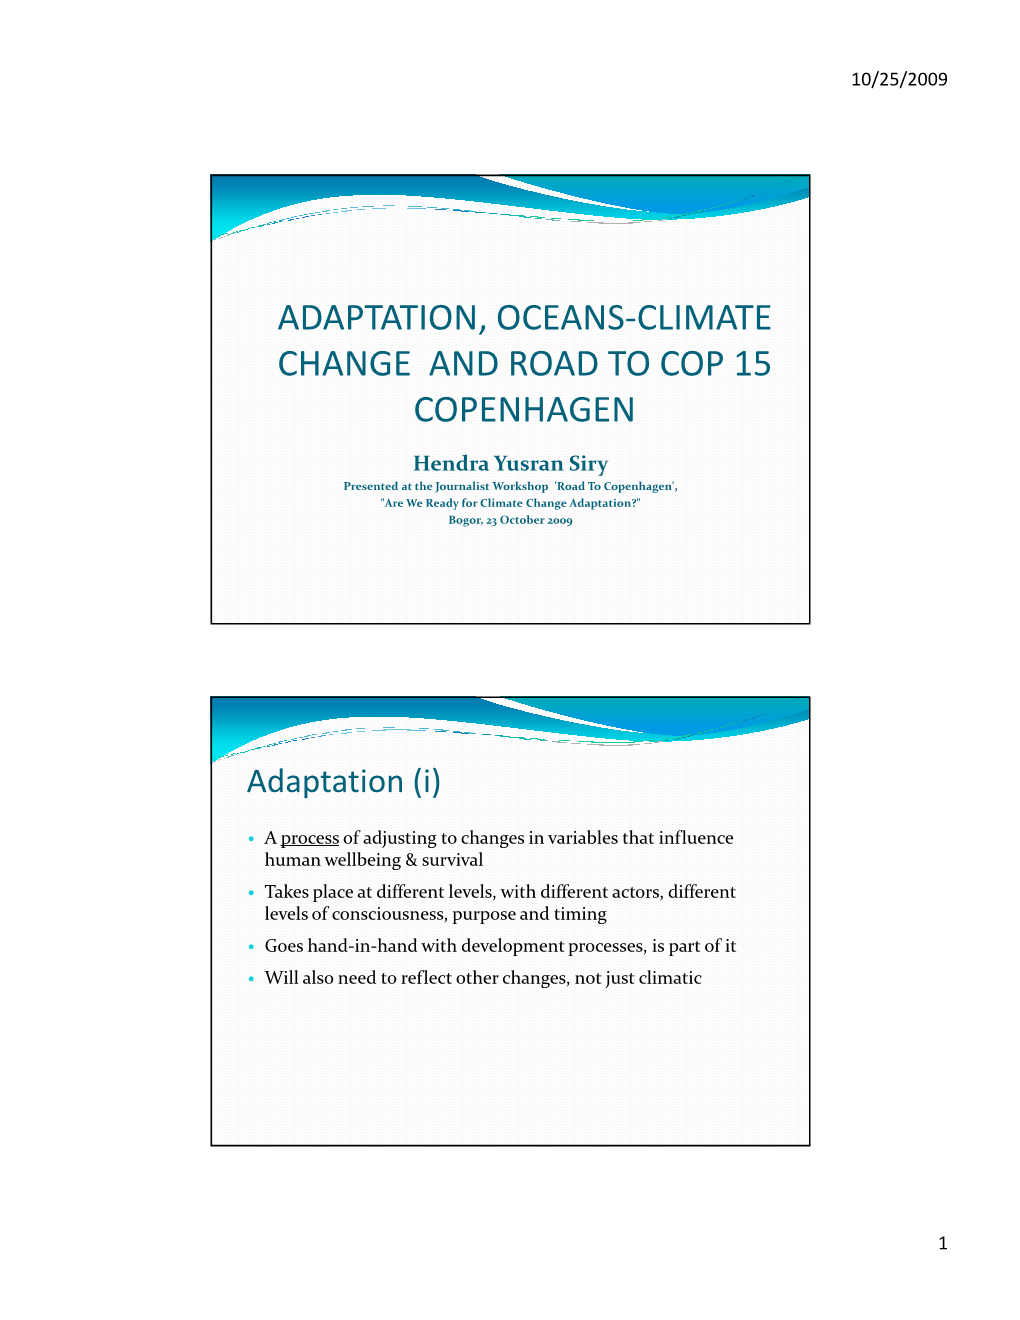 Adaptation, Oceans-Climate Change and Road to Cop 15 Copenhagen